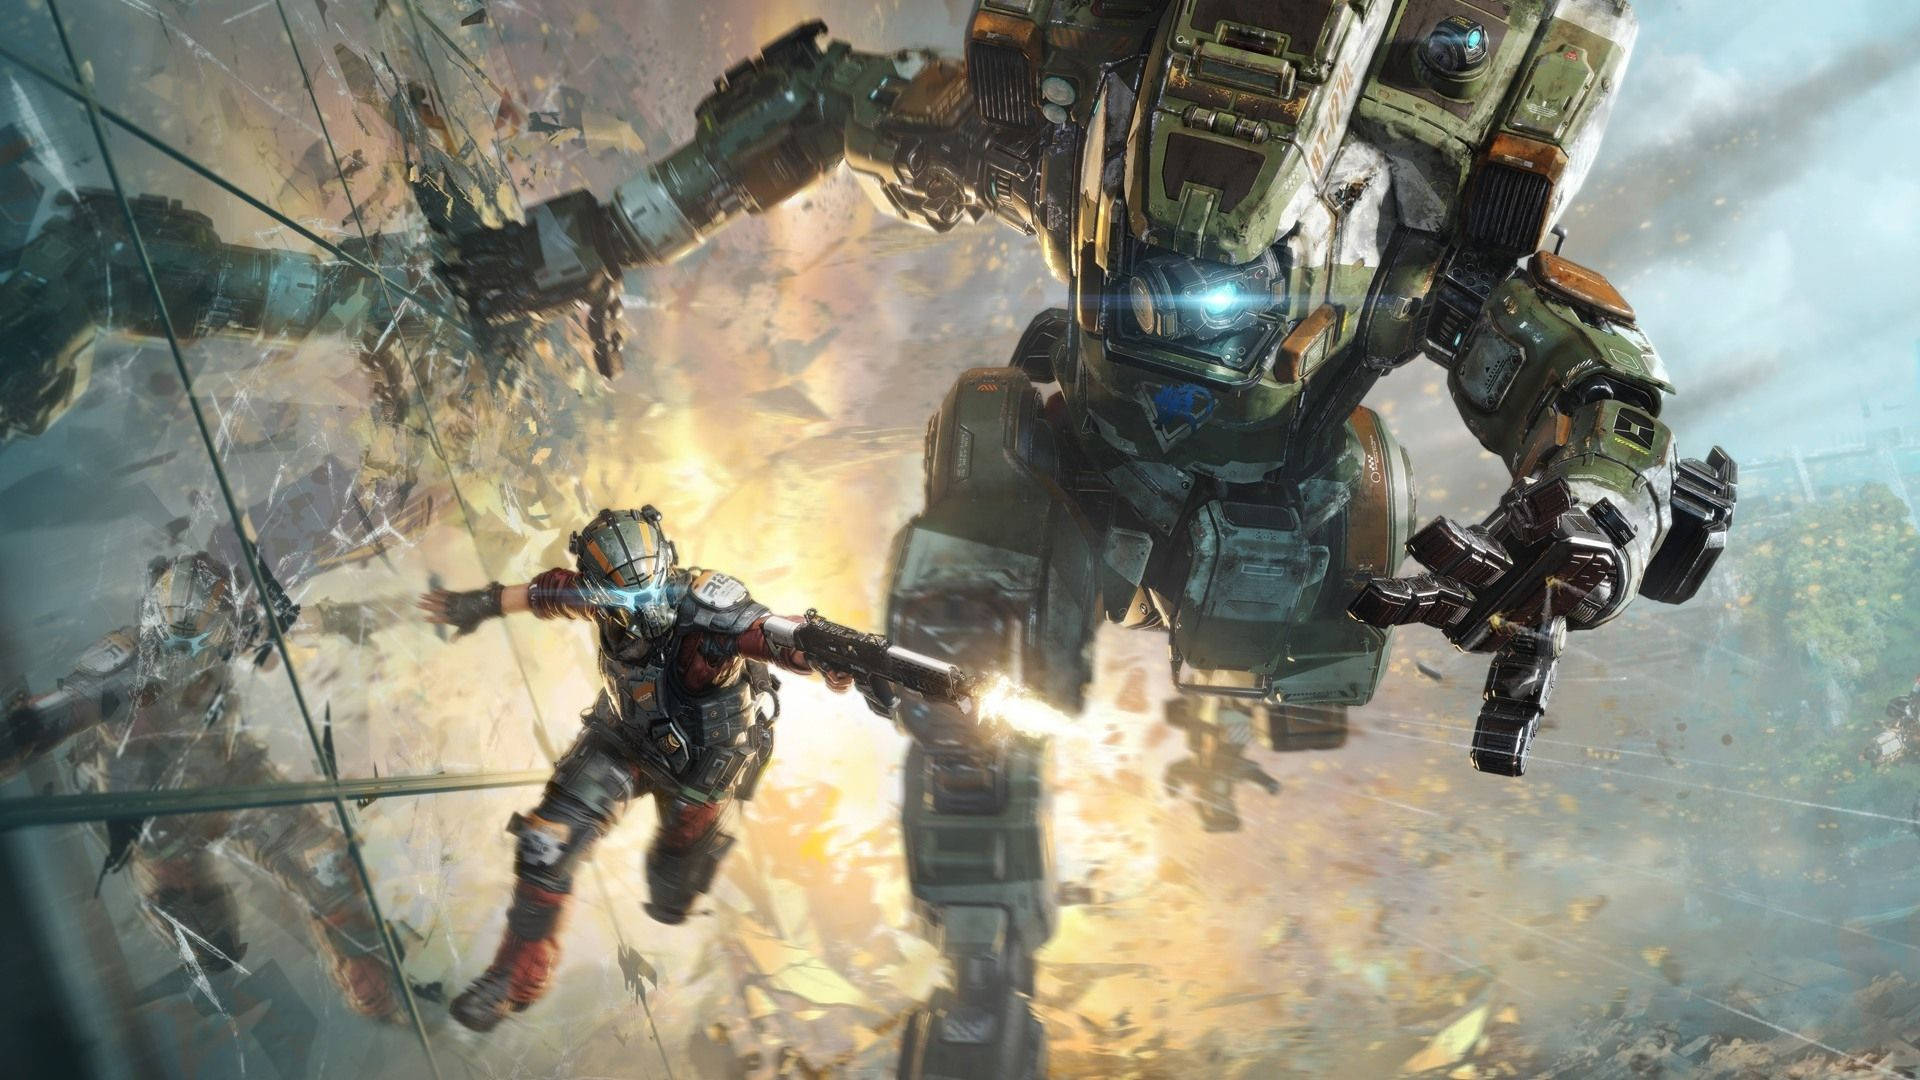 “Ready for Battle: Pilot and Titan Unite in Titanfall 2” Wallpaper